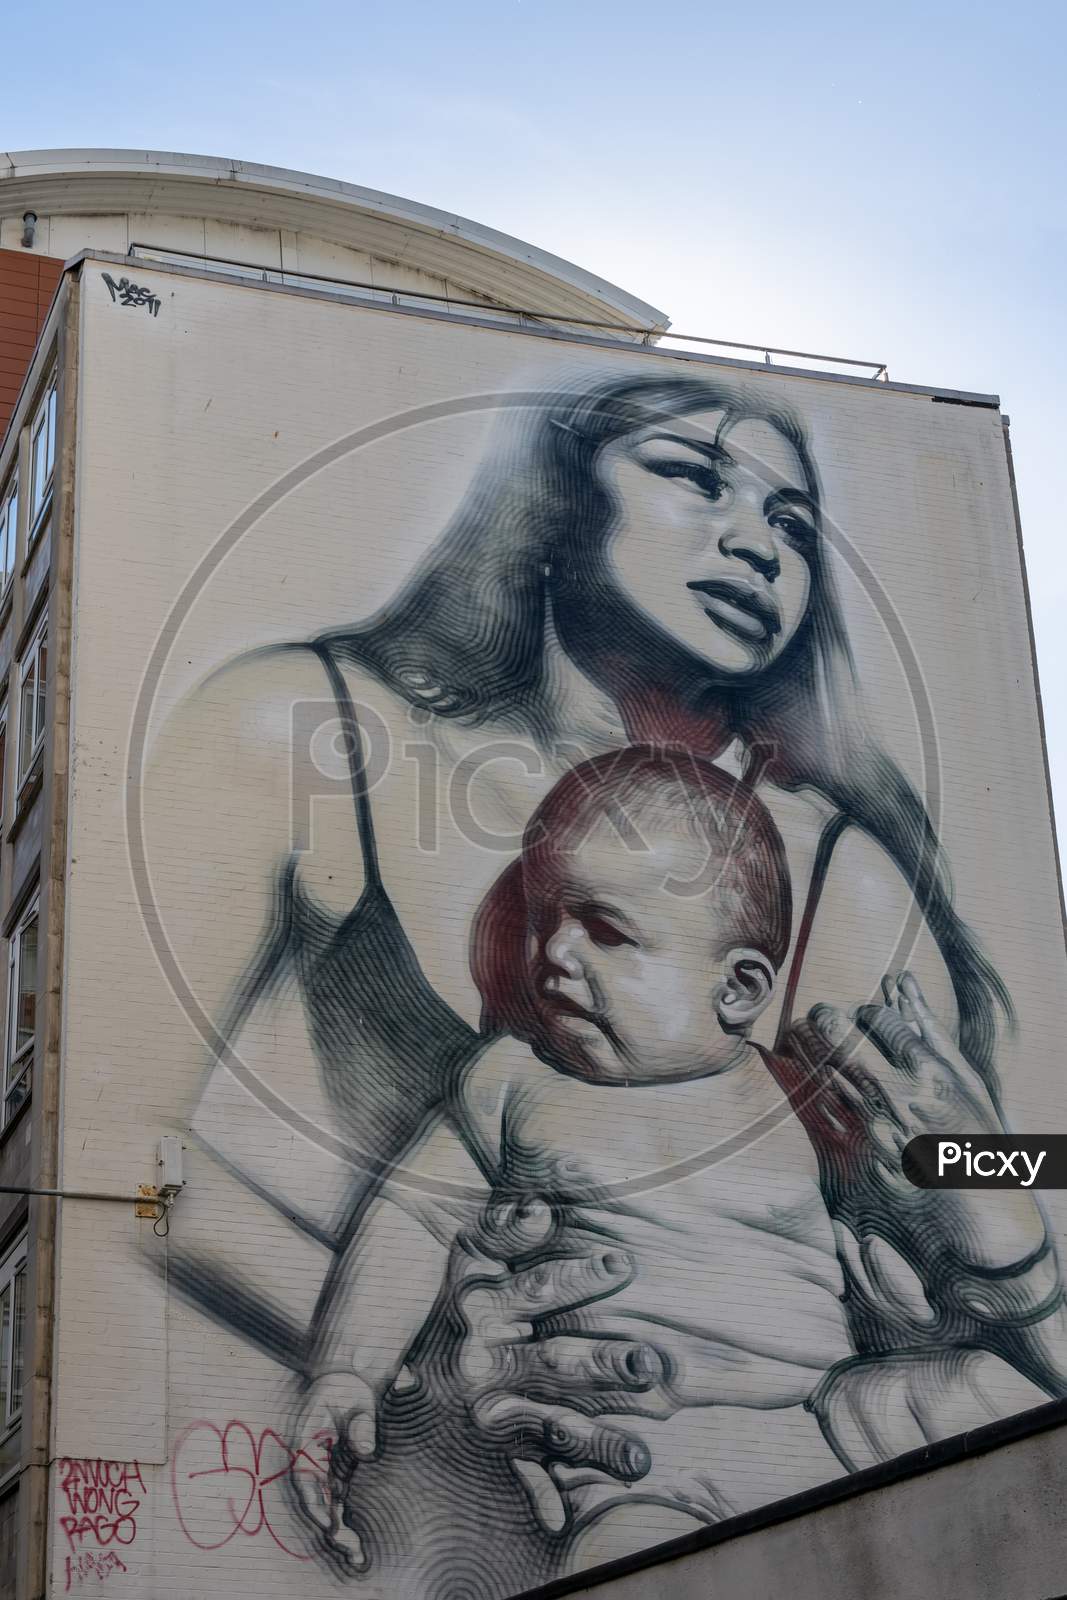 Bristol, Uk - May 14 : Woman And Baby Portrait Graffiti On A Wall  In Bristol On May 14, 2019